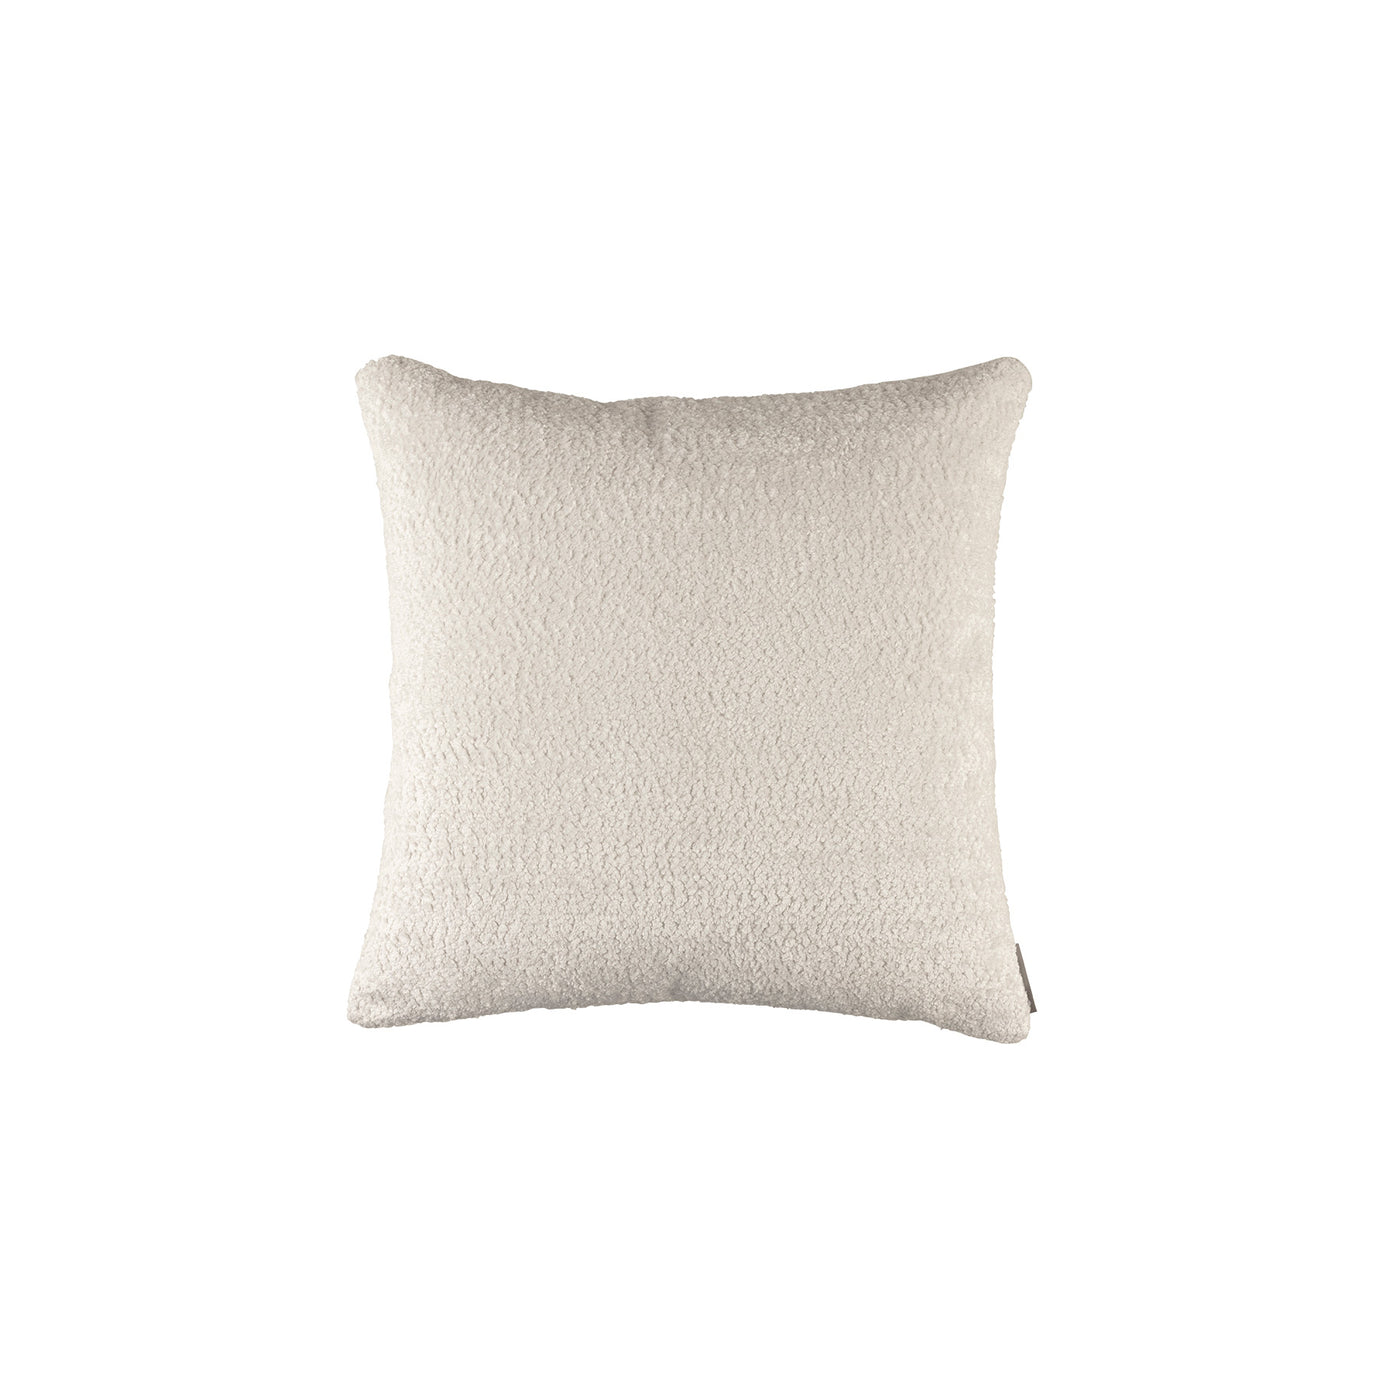 Zoey Oyster Large Square Pillow (24x24)